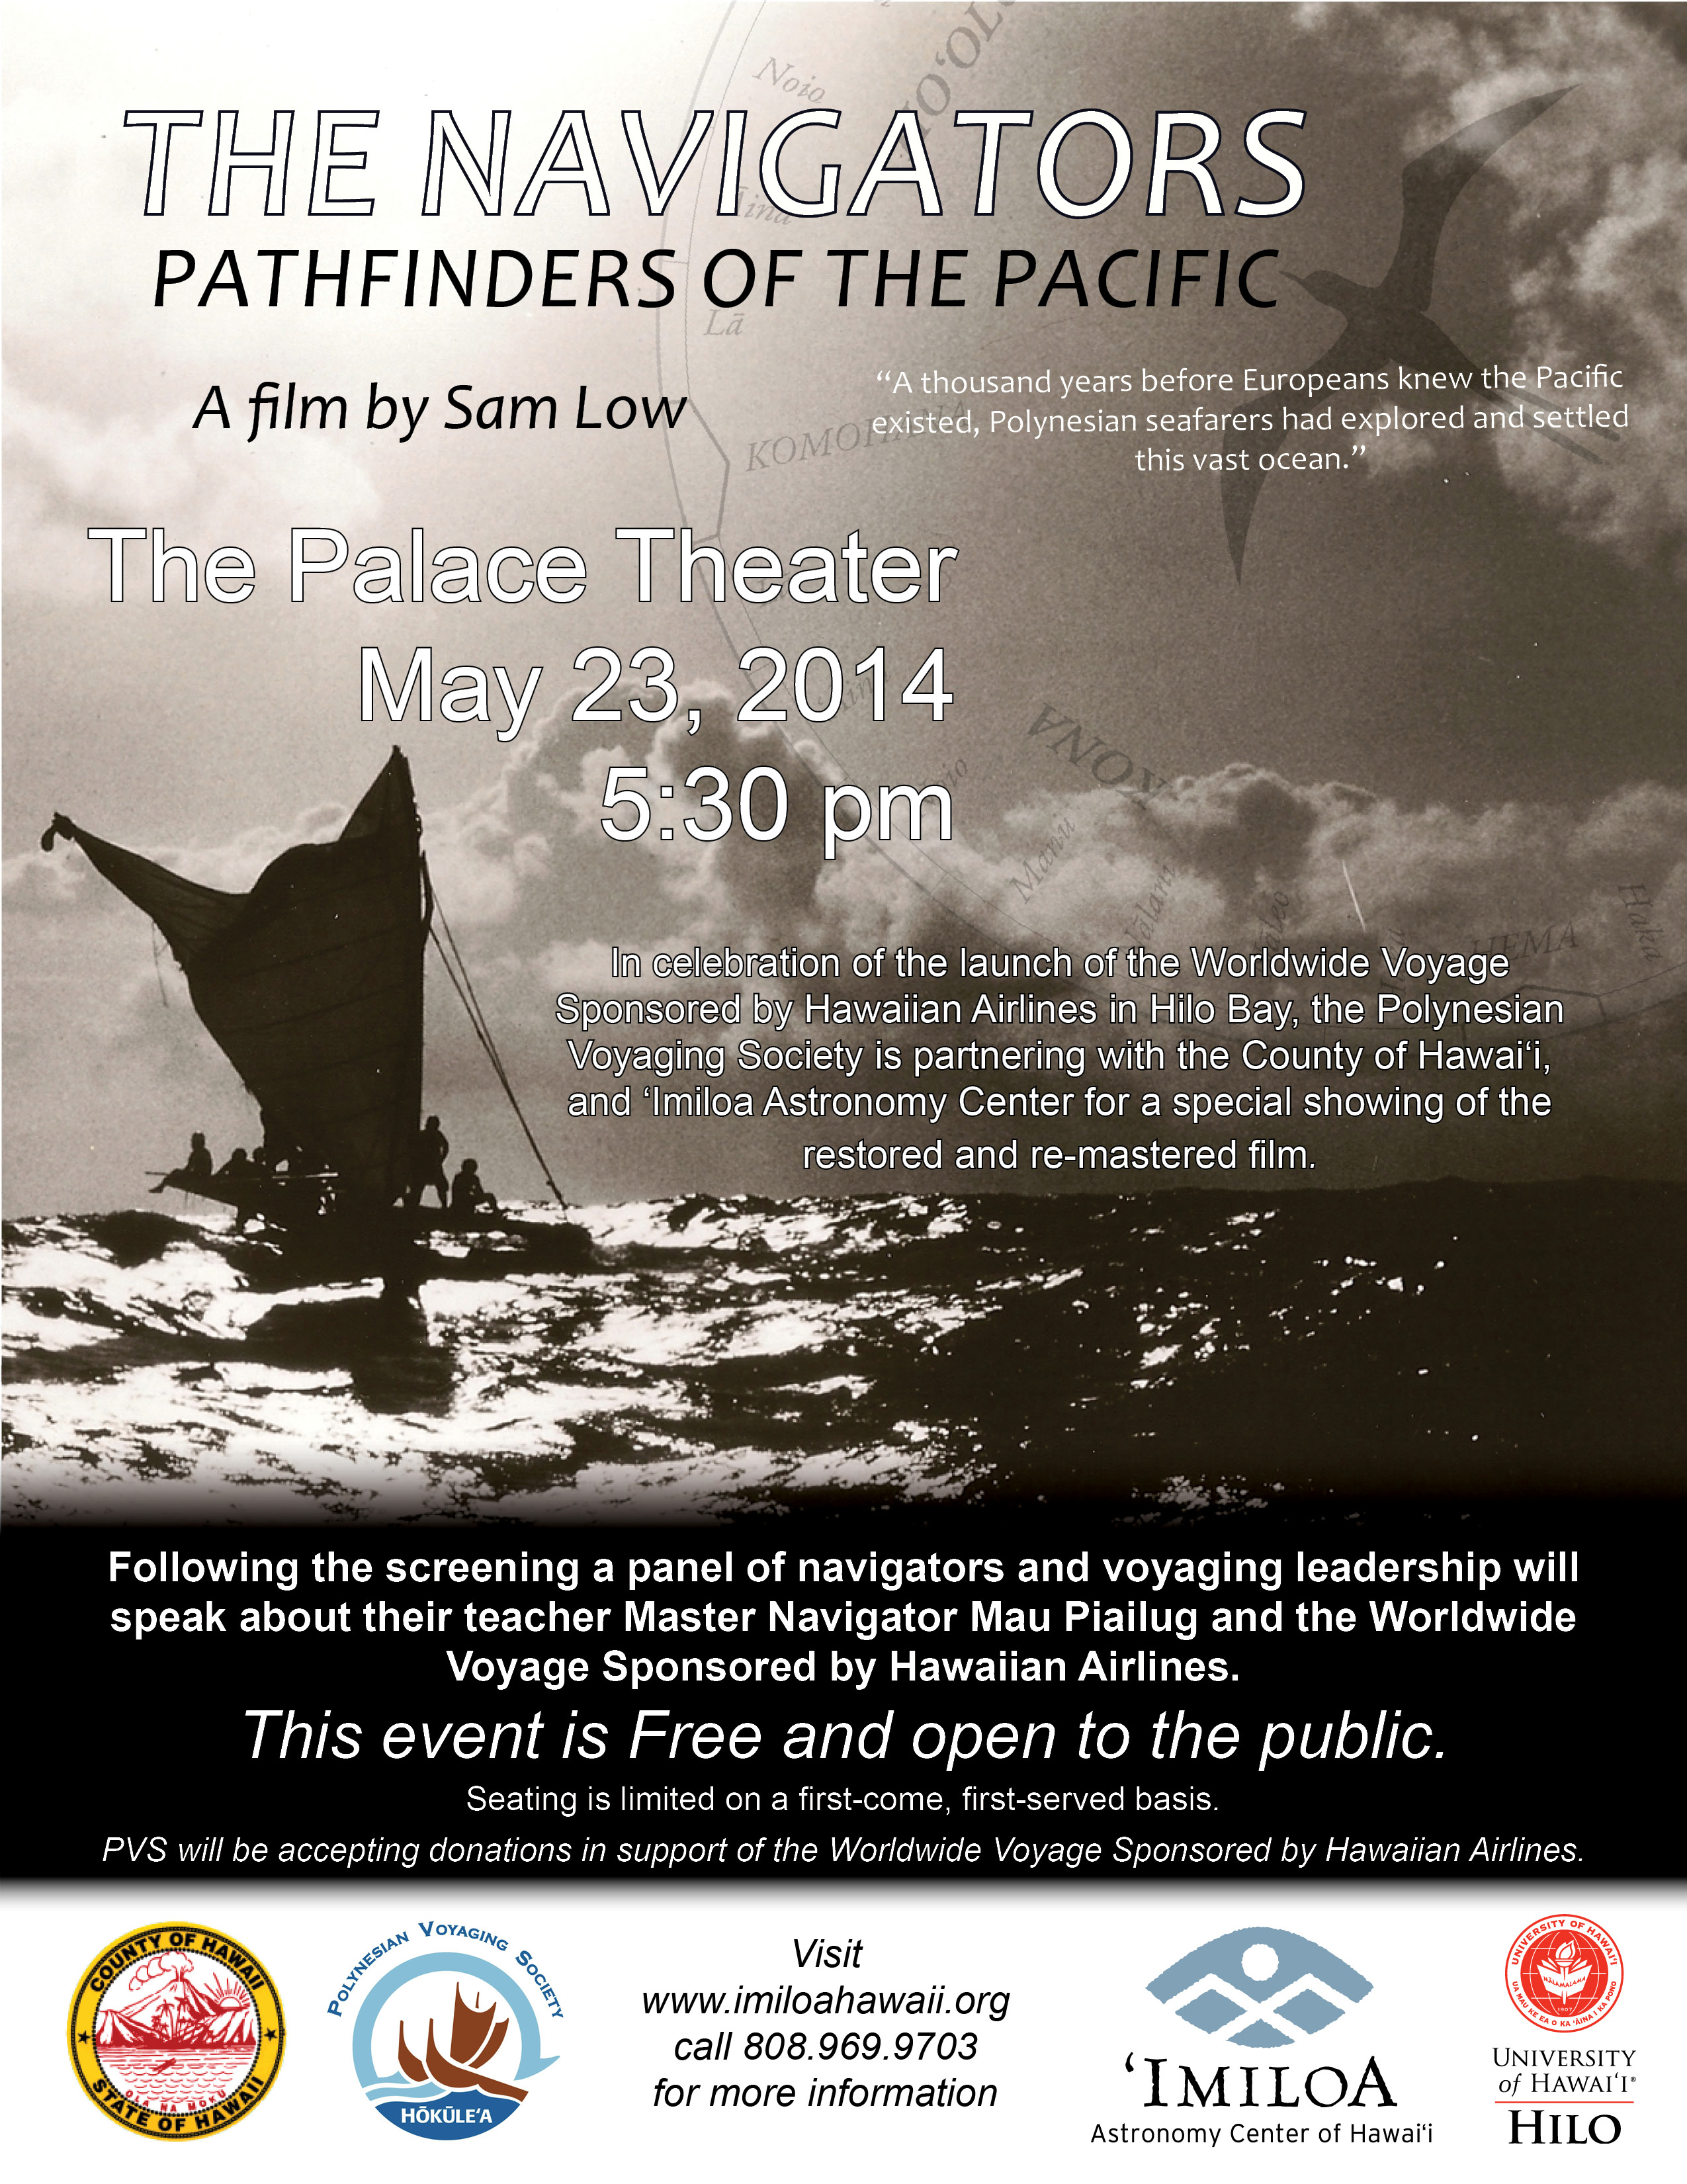 Promotional poster for upcoming Palace Theater event